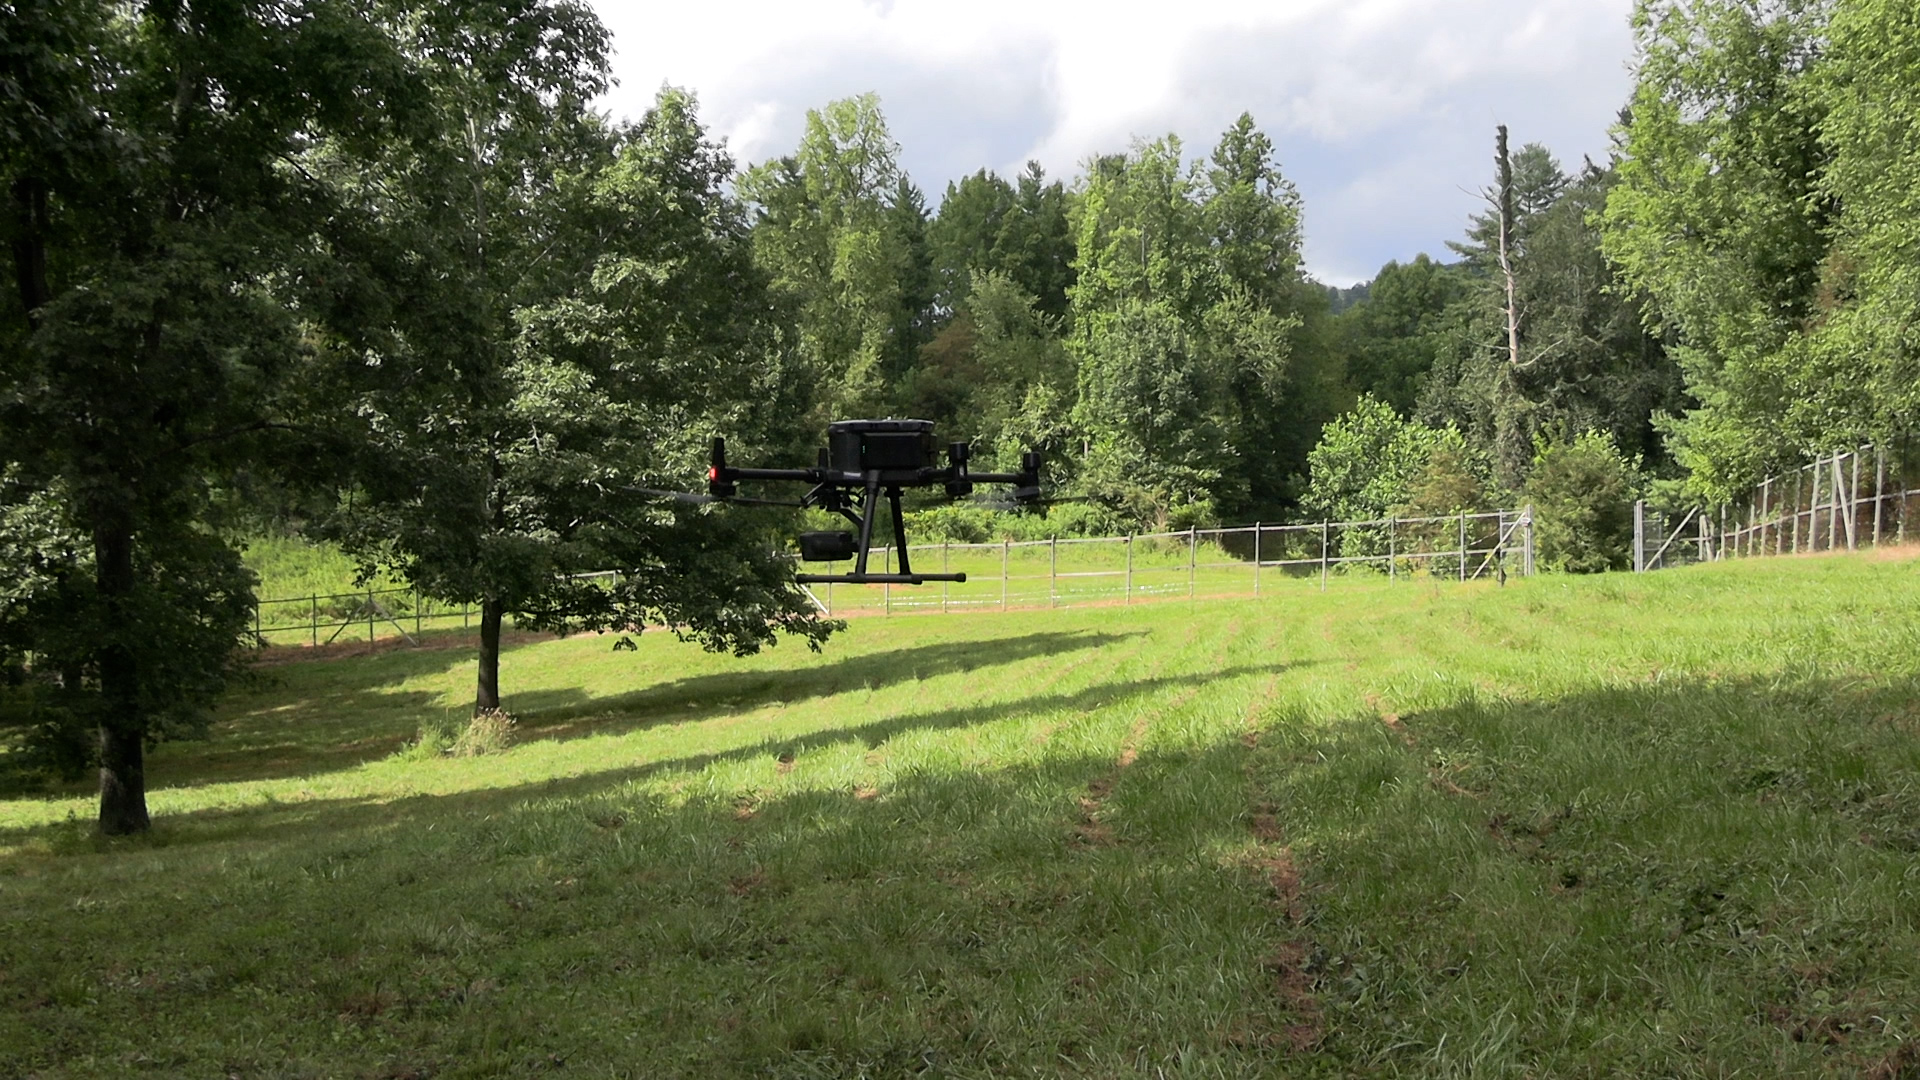 Drone hovers above ground in tree orchard.